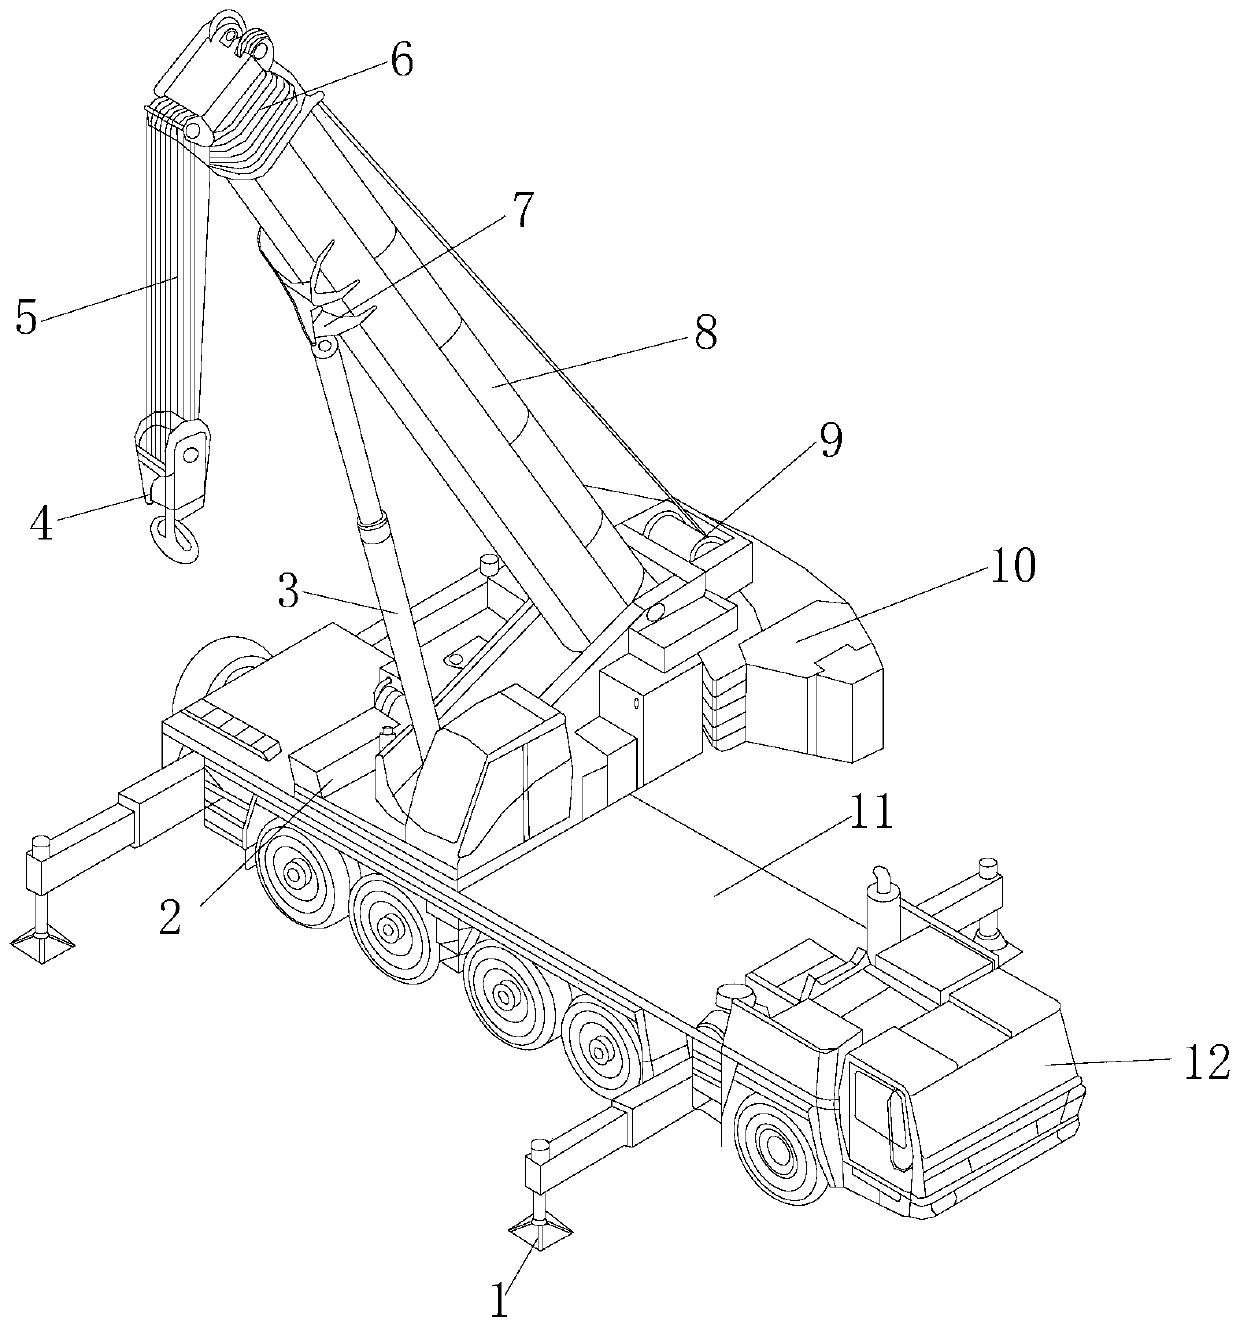 Self-propelled crane for building construction